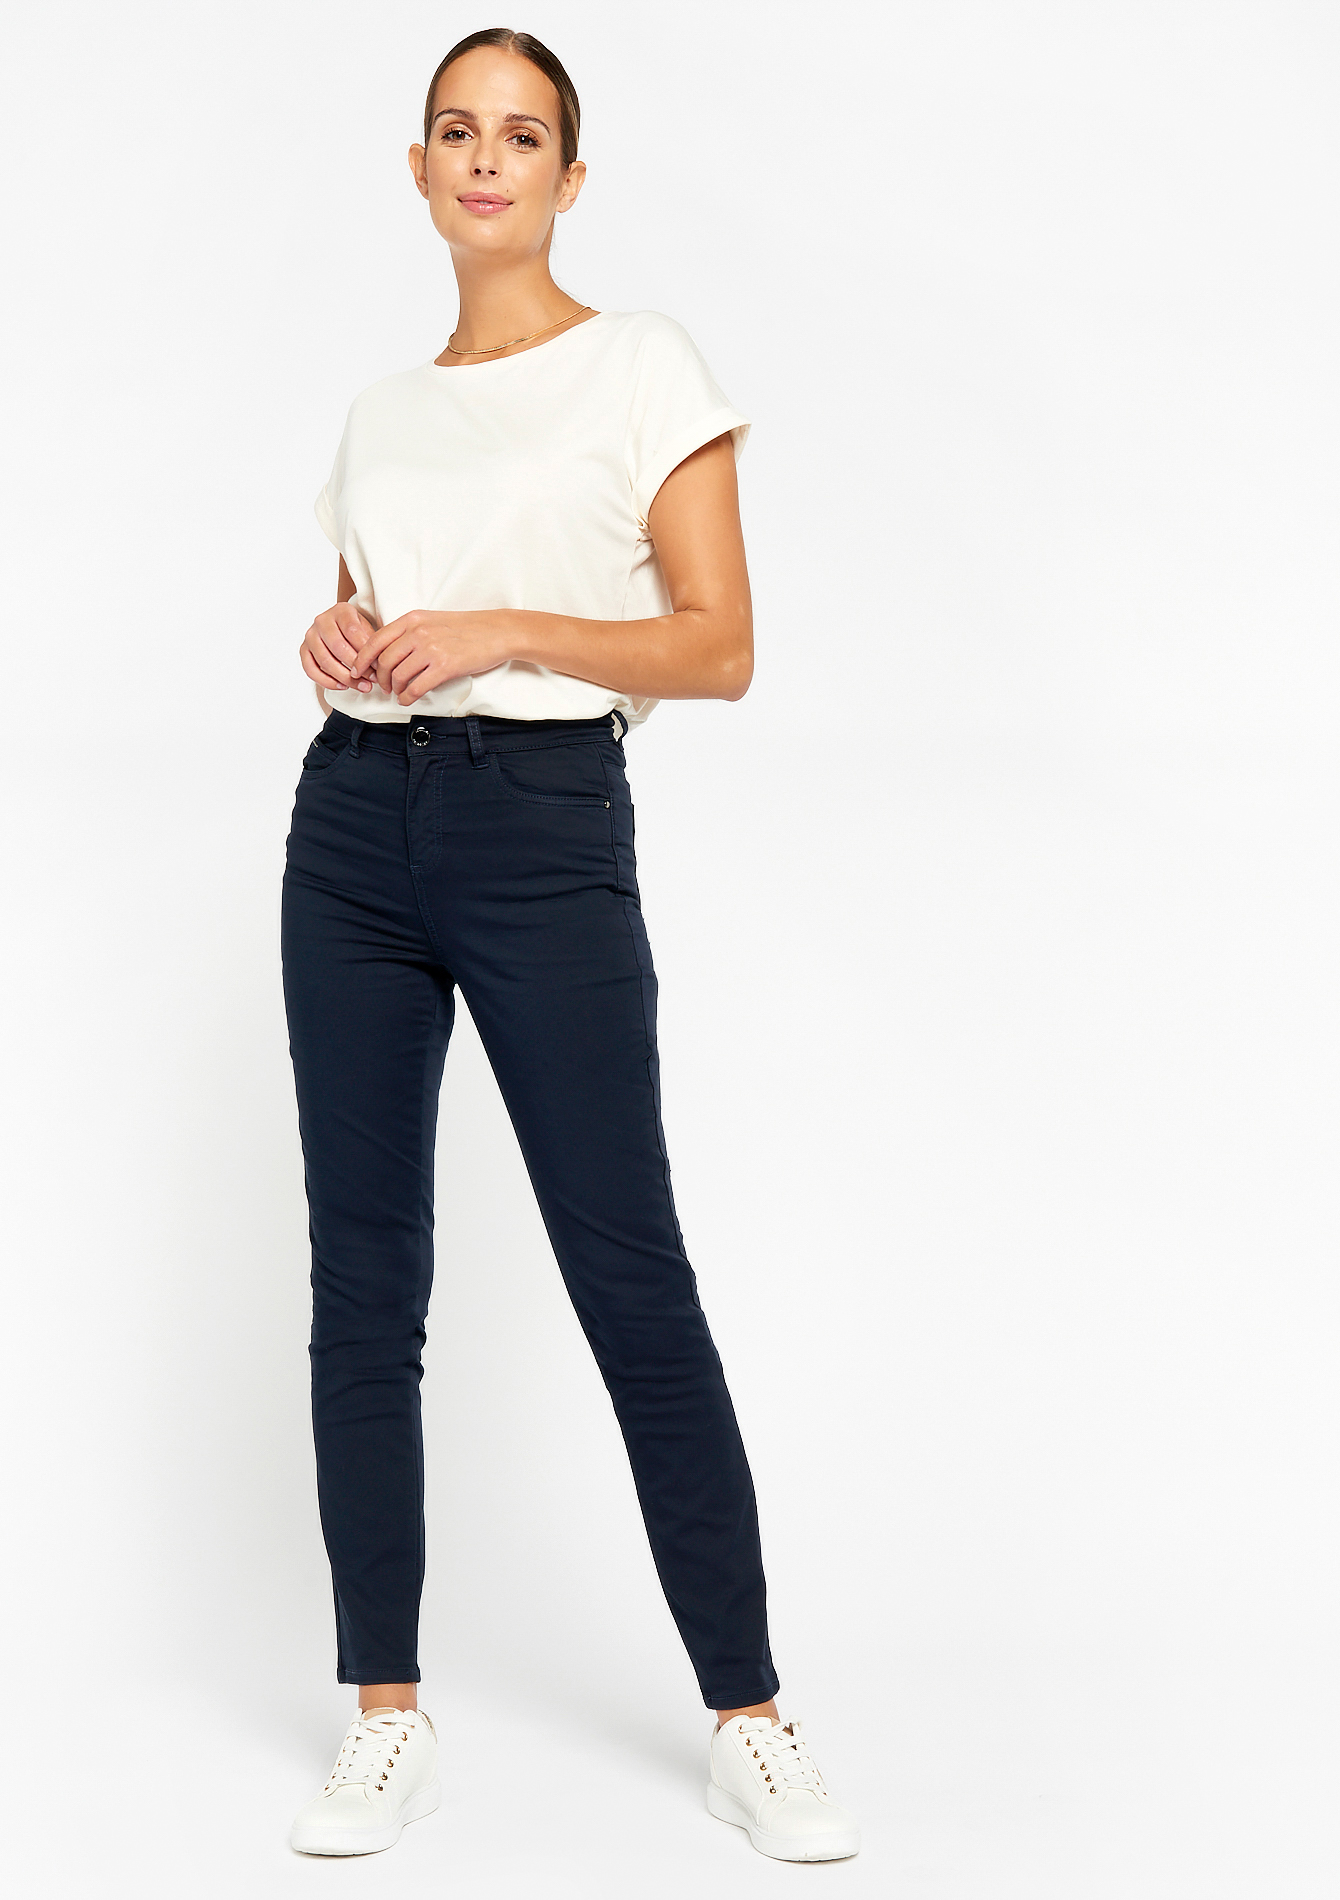 Women's Skinny Trousers | Explore our New Arrivals | ZARA